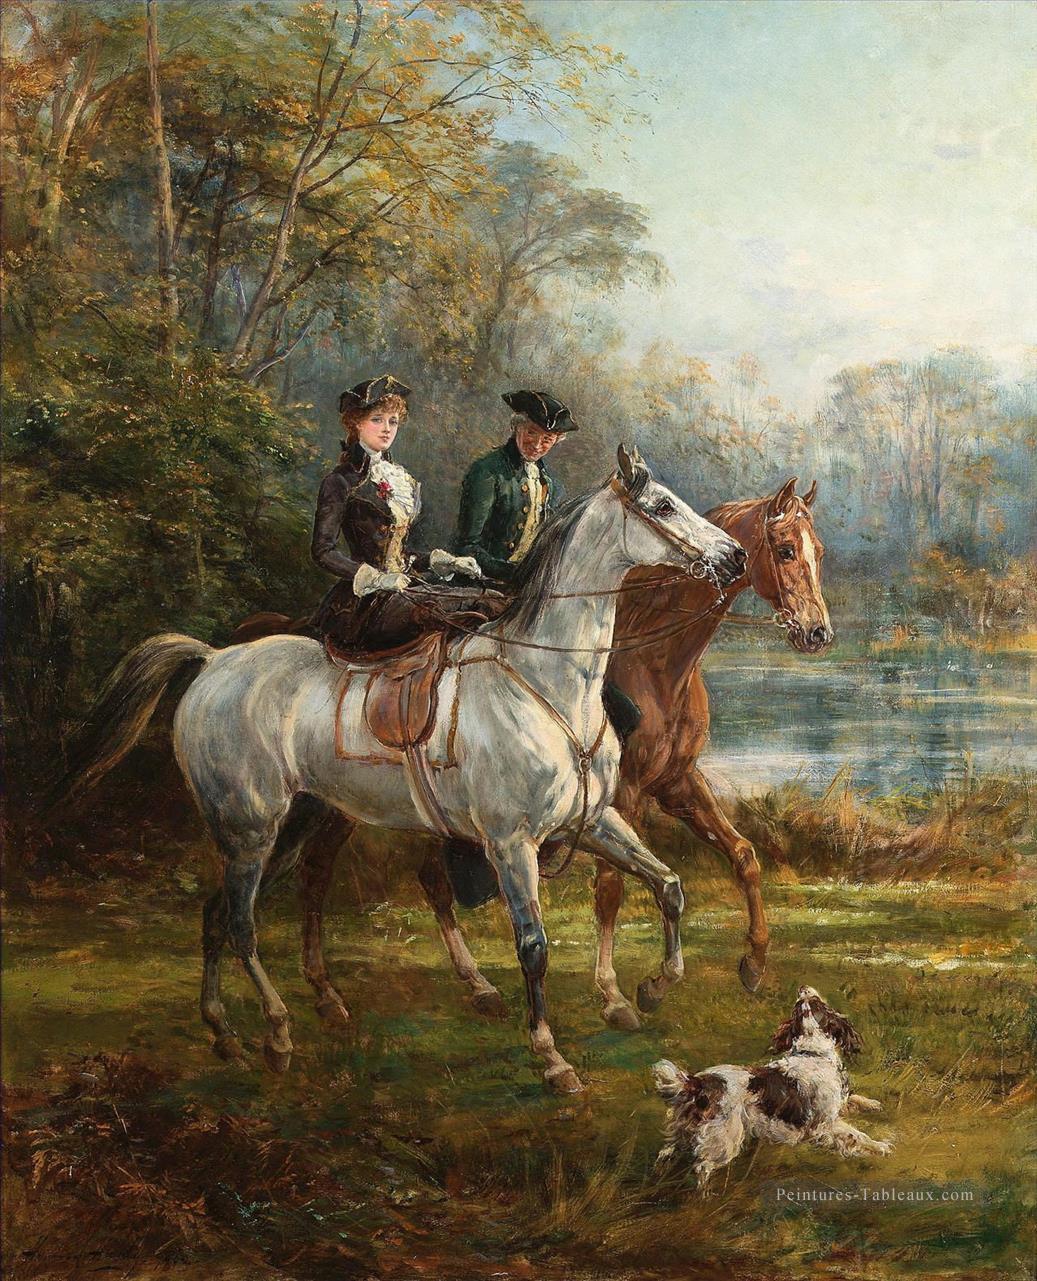 Le matin Ride 2 Heywood Hardy chasse Peintures à l'huile